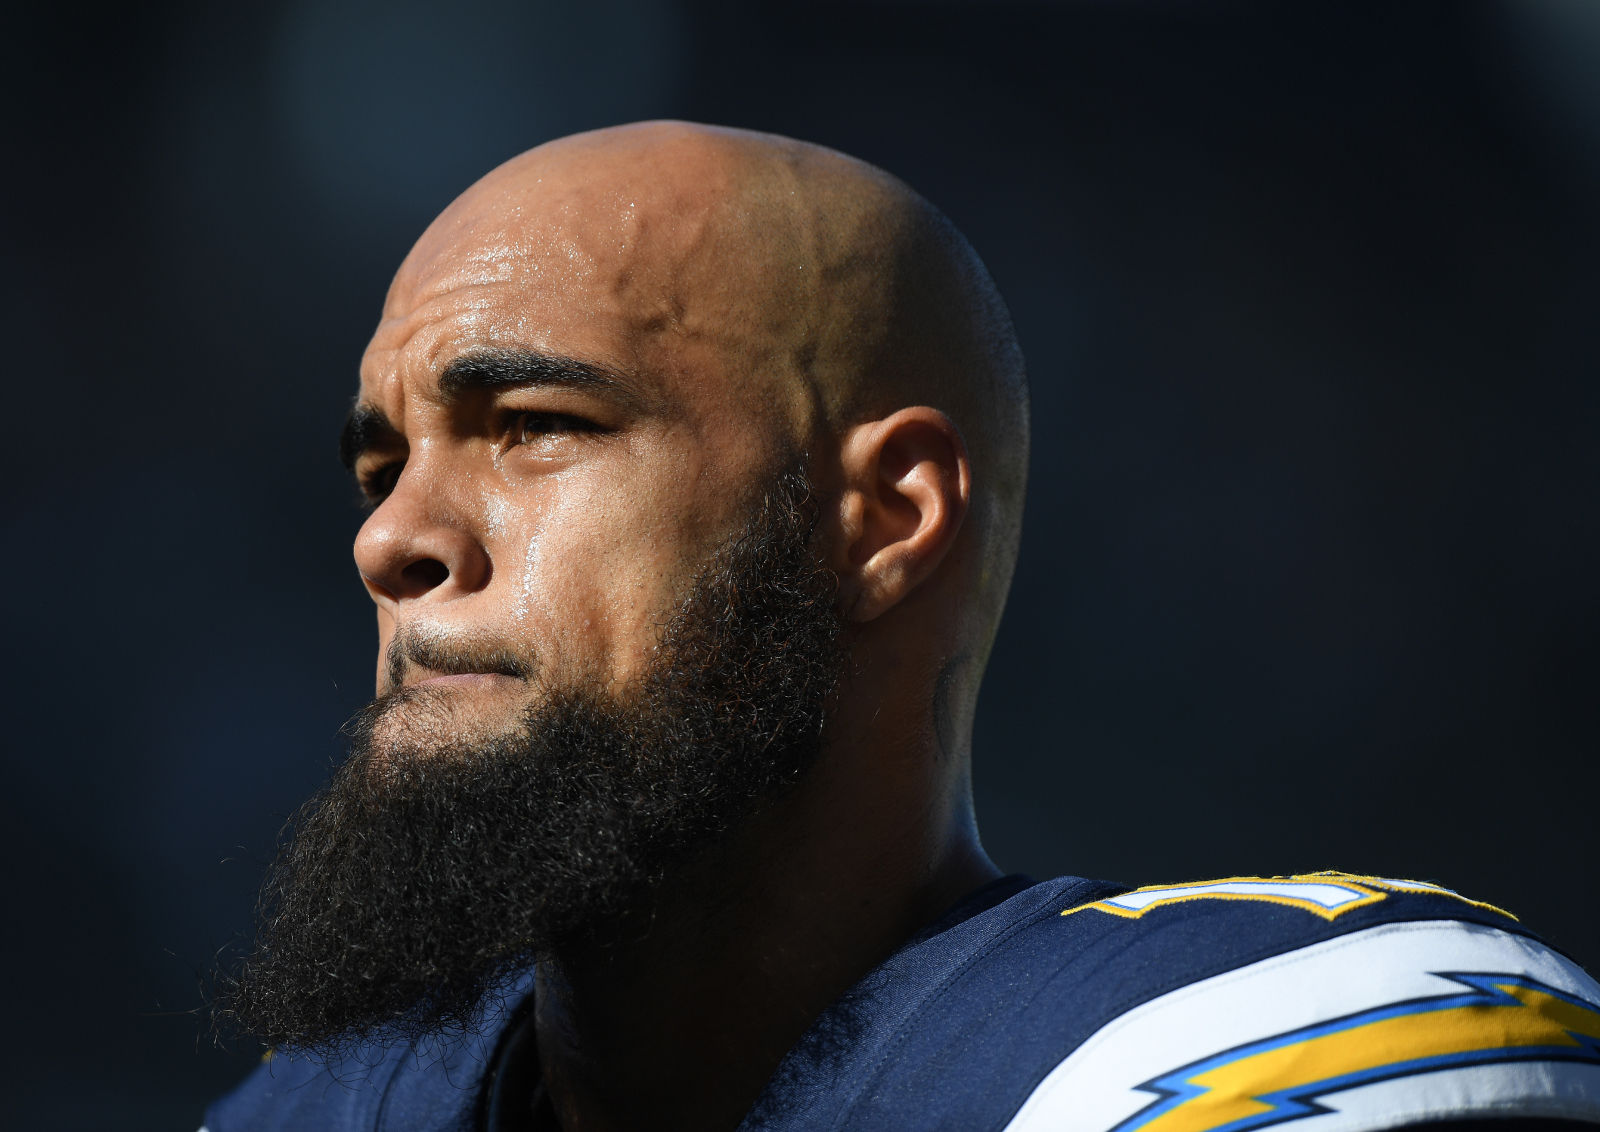 Keenan Allen a top receiver in the NFL. However, he just sent a stern message to the rest of the league and put a ton of pressure on himself.